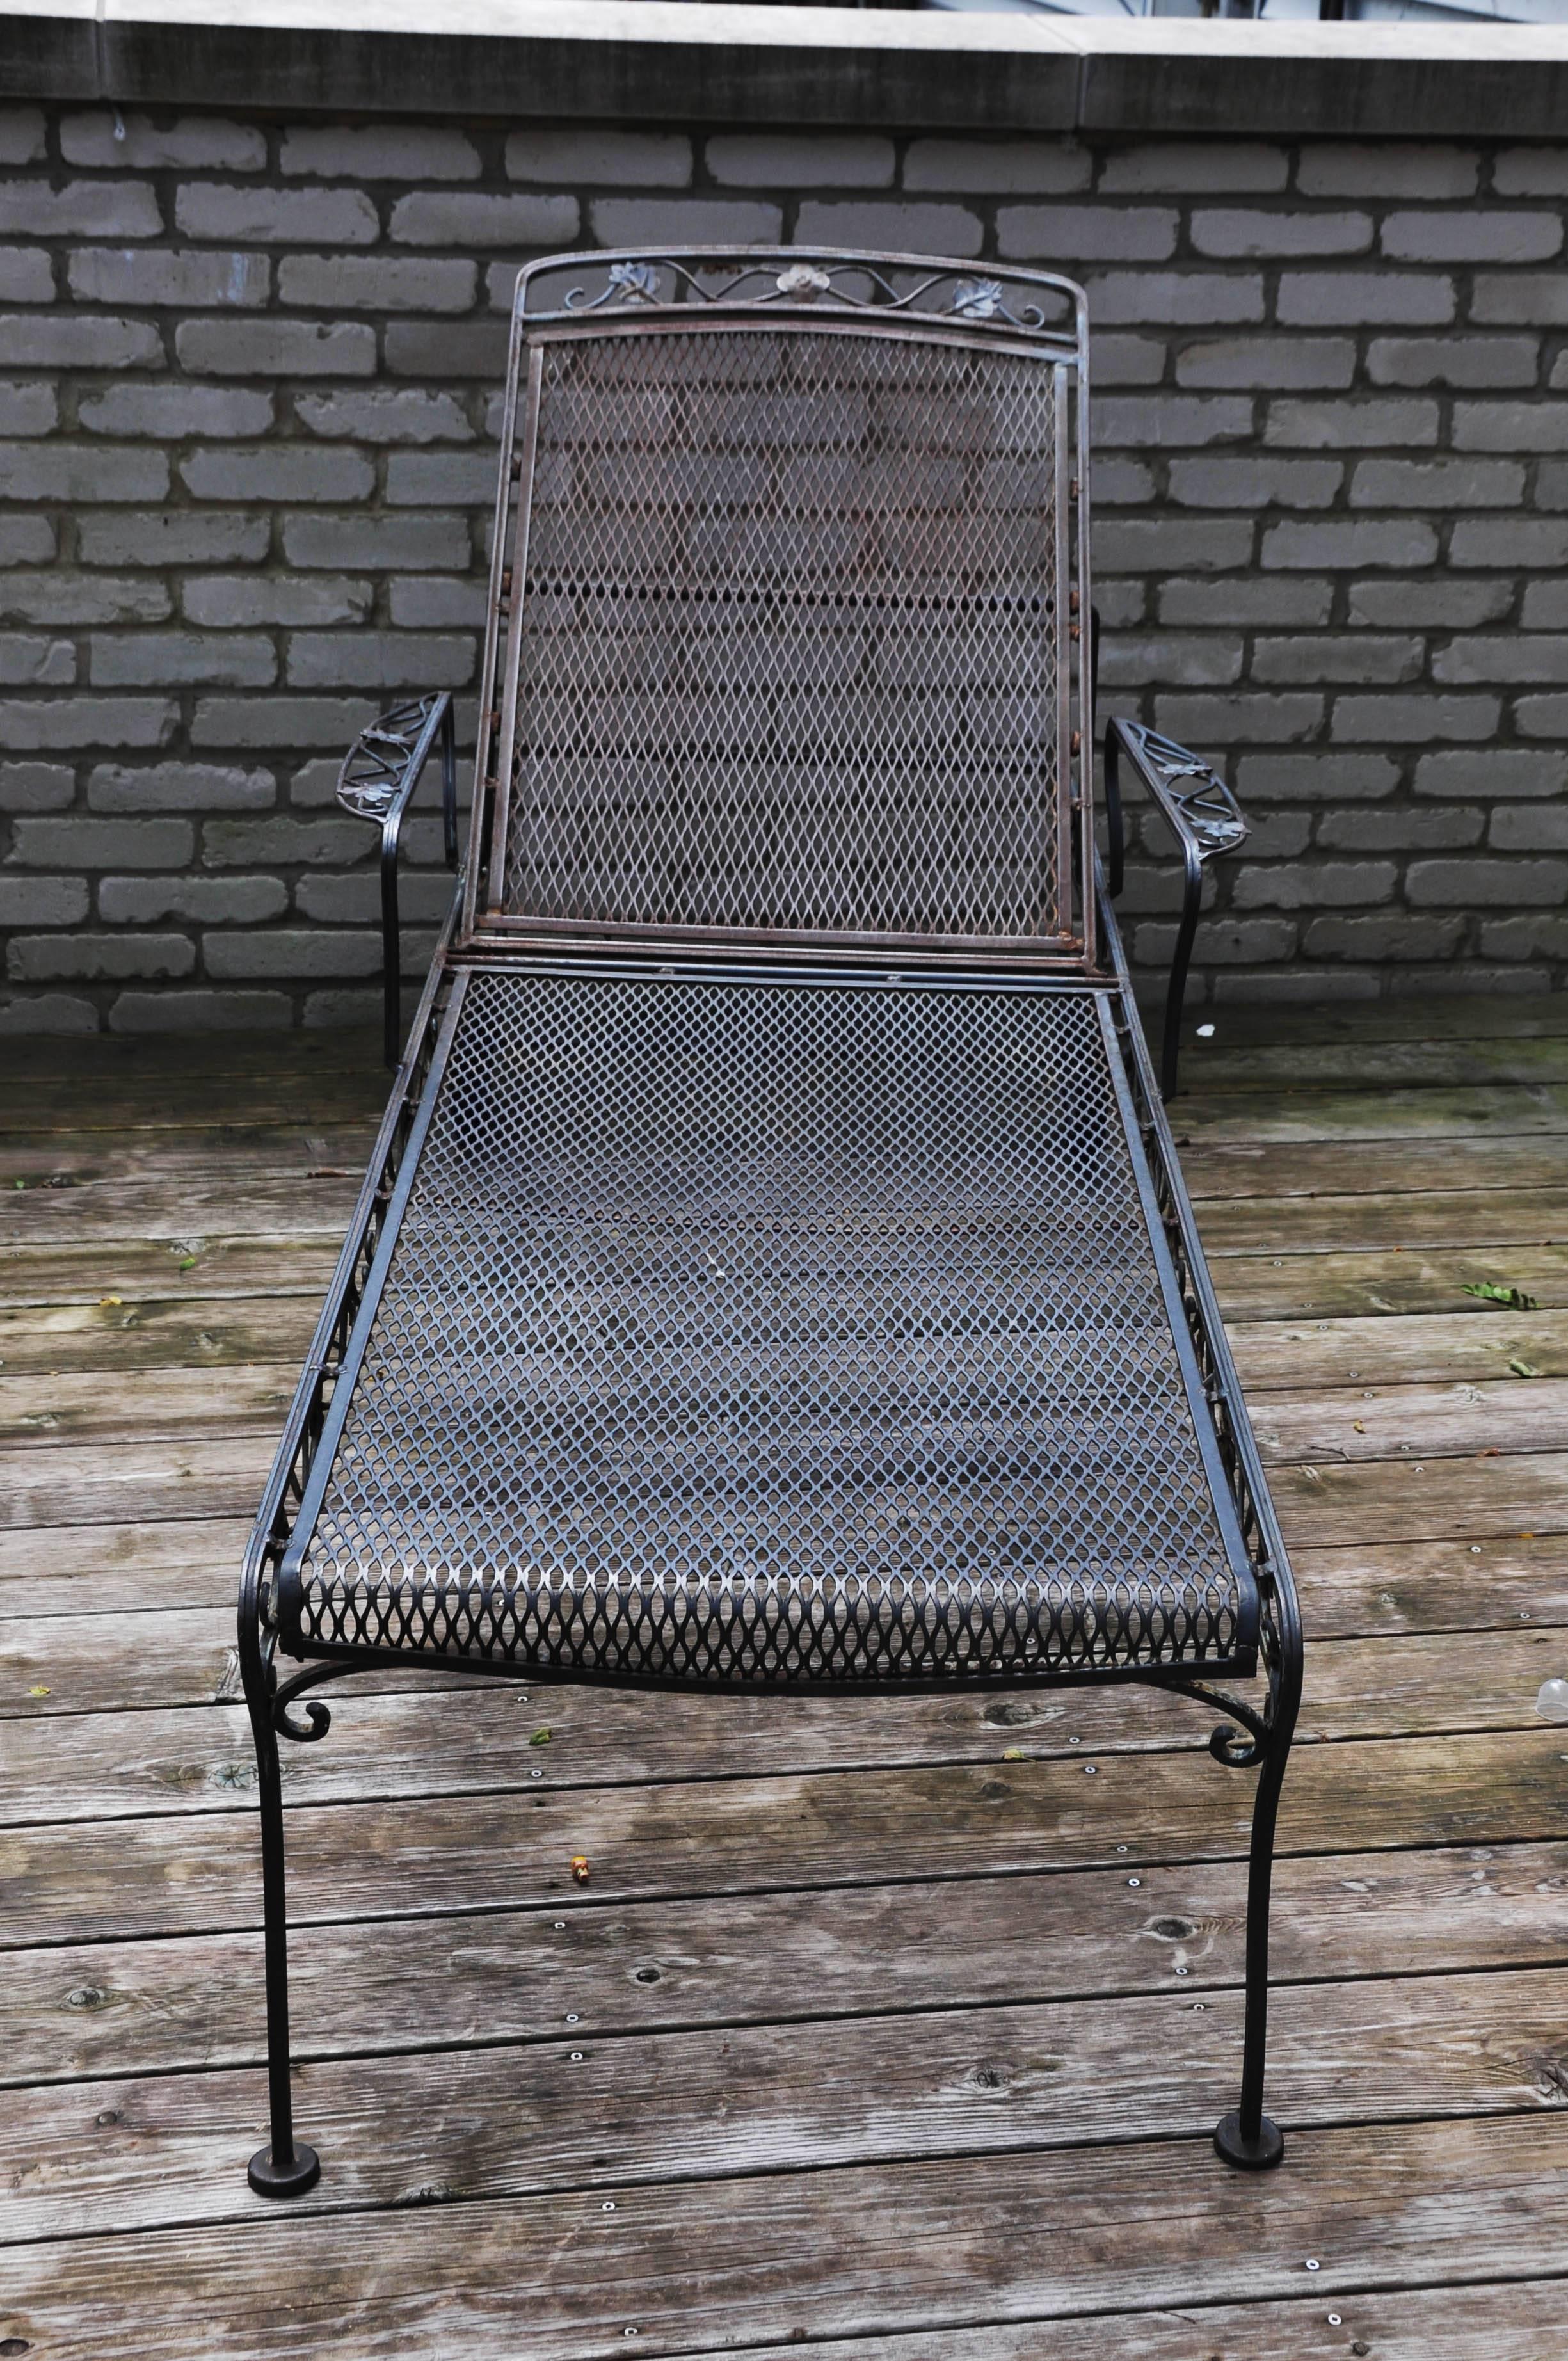 Forged Woodard Wrought Iron Chaise Lounge, Michigan US, 1950 For Sale